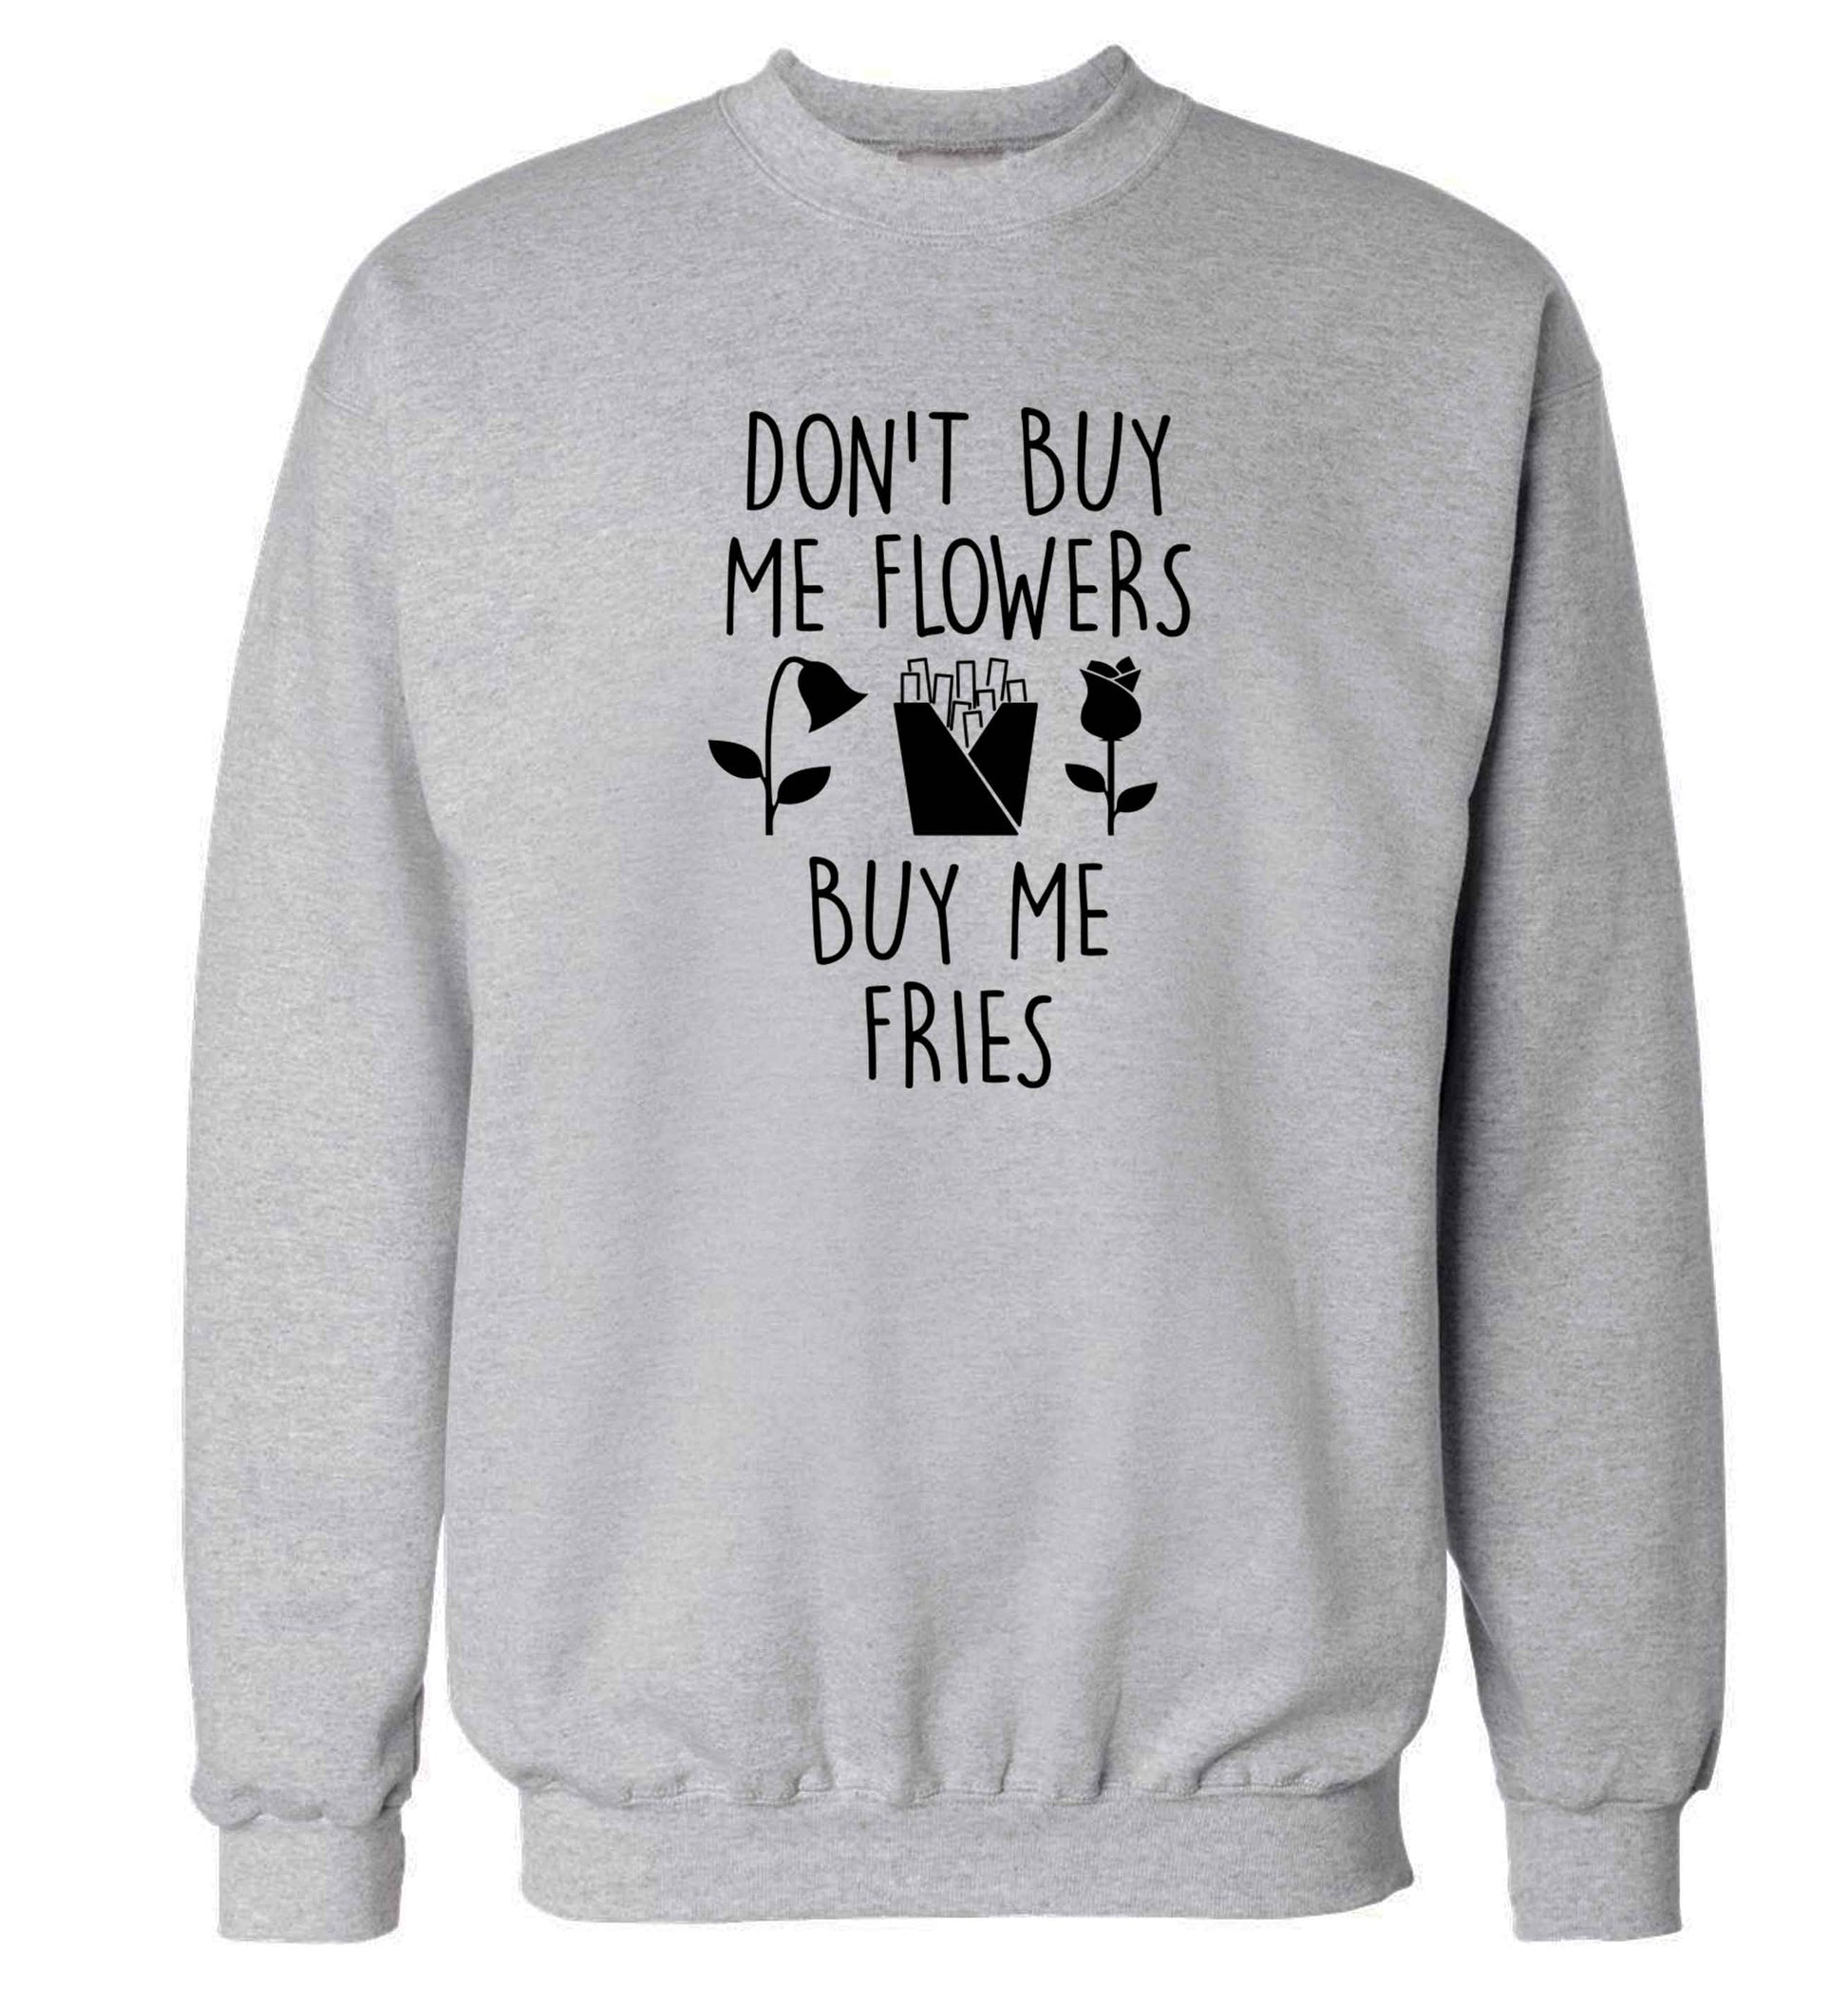 Don't buy me flowers buy me fries adult's unisex grey sweater 2XL